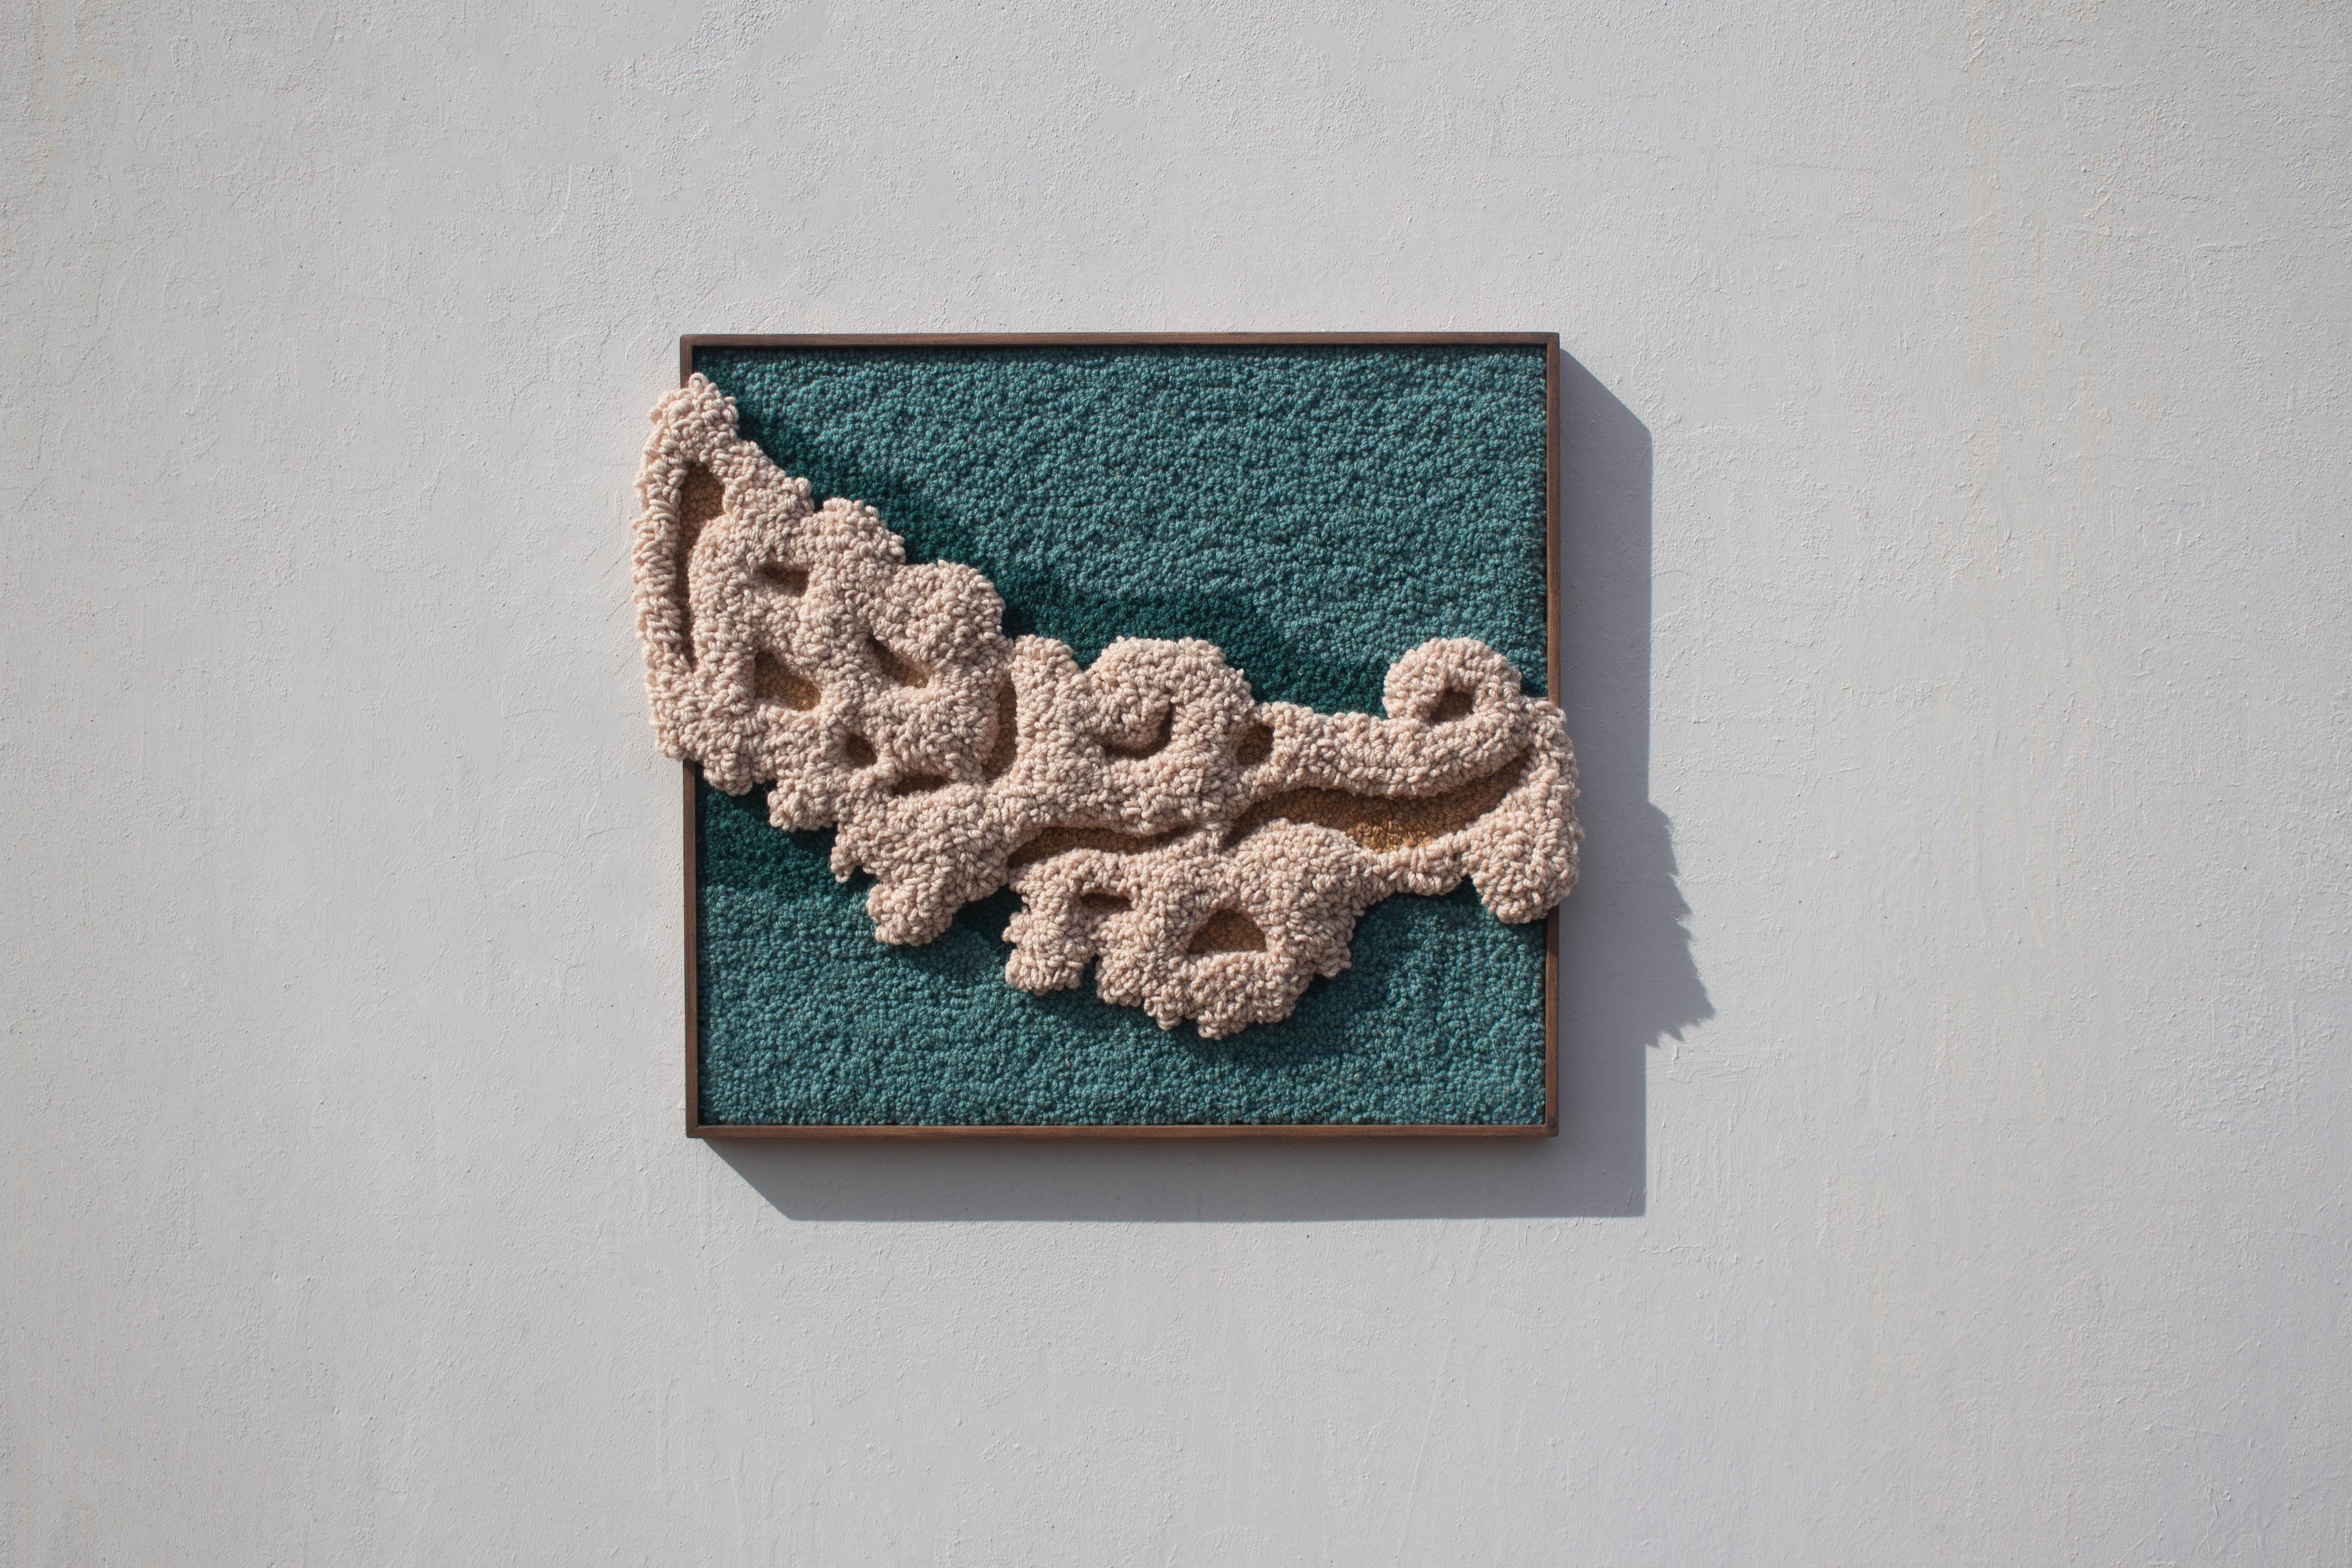 Handmade using tufting technique and 100% Portuguese wool yarn with anti-moth treatment. The bass-relief is carved with scissors, creating different heights and a textured based landscape. The frame is designed and produced by the studio, made with